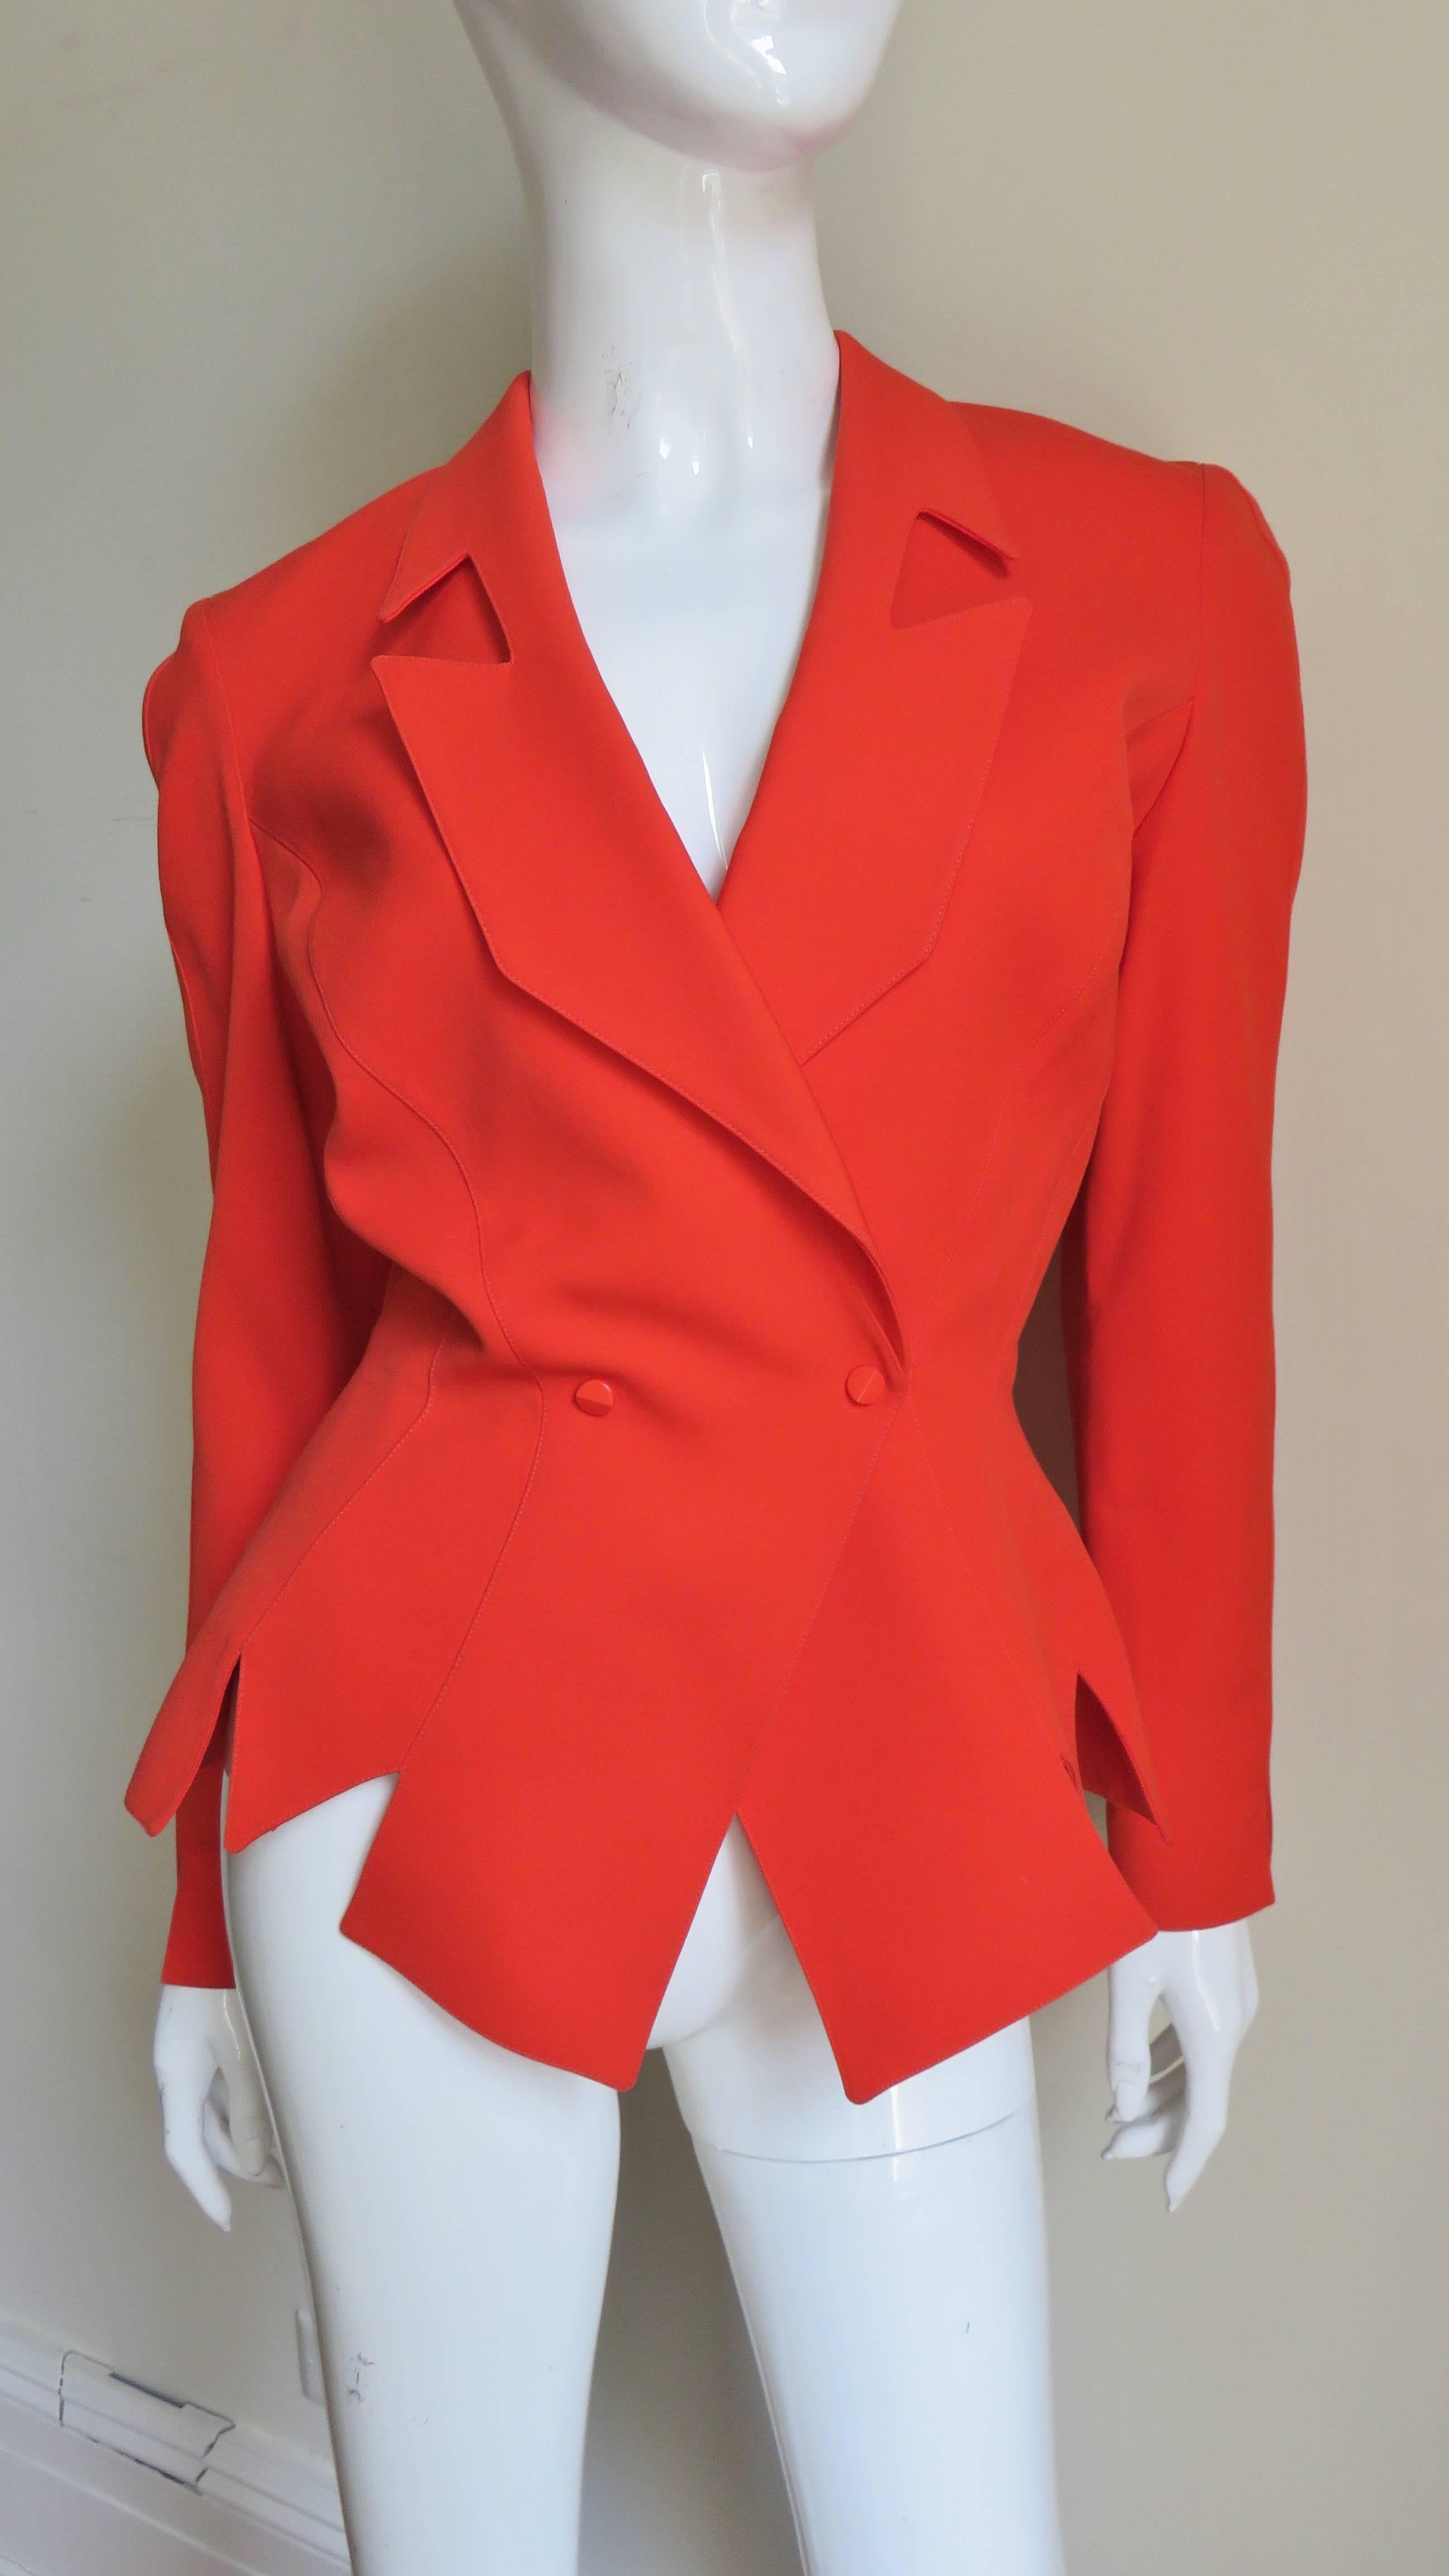 A great bright orange jacket jacket from Theirry Mugler.  It has a cutout lapel collar and has multiple length wise seaming creating a cinched waist.  The sleeve cuffs have cut out points as does the bottom of the jacket.  It is fully lined in